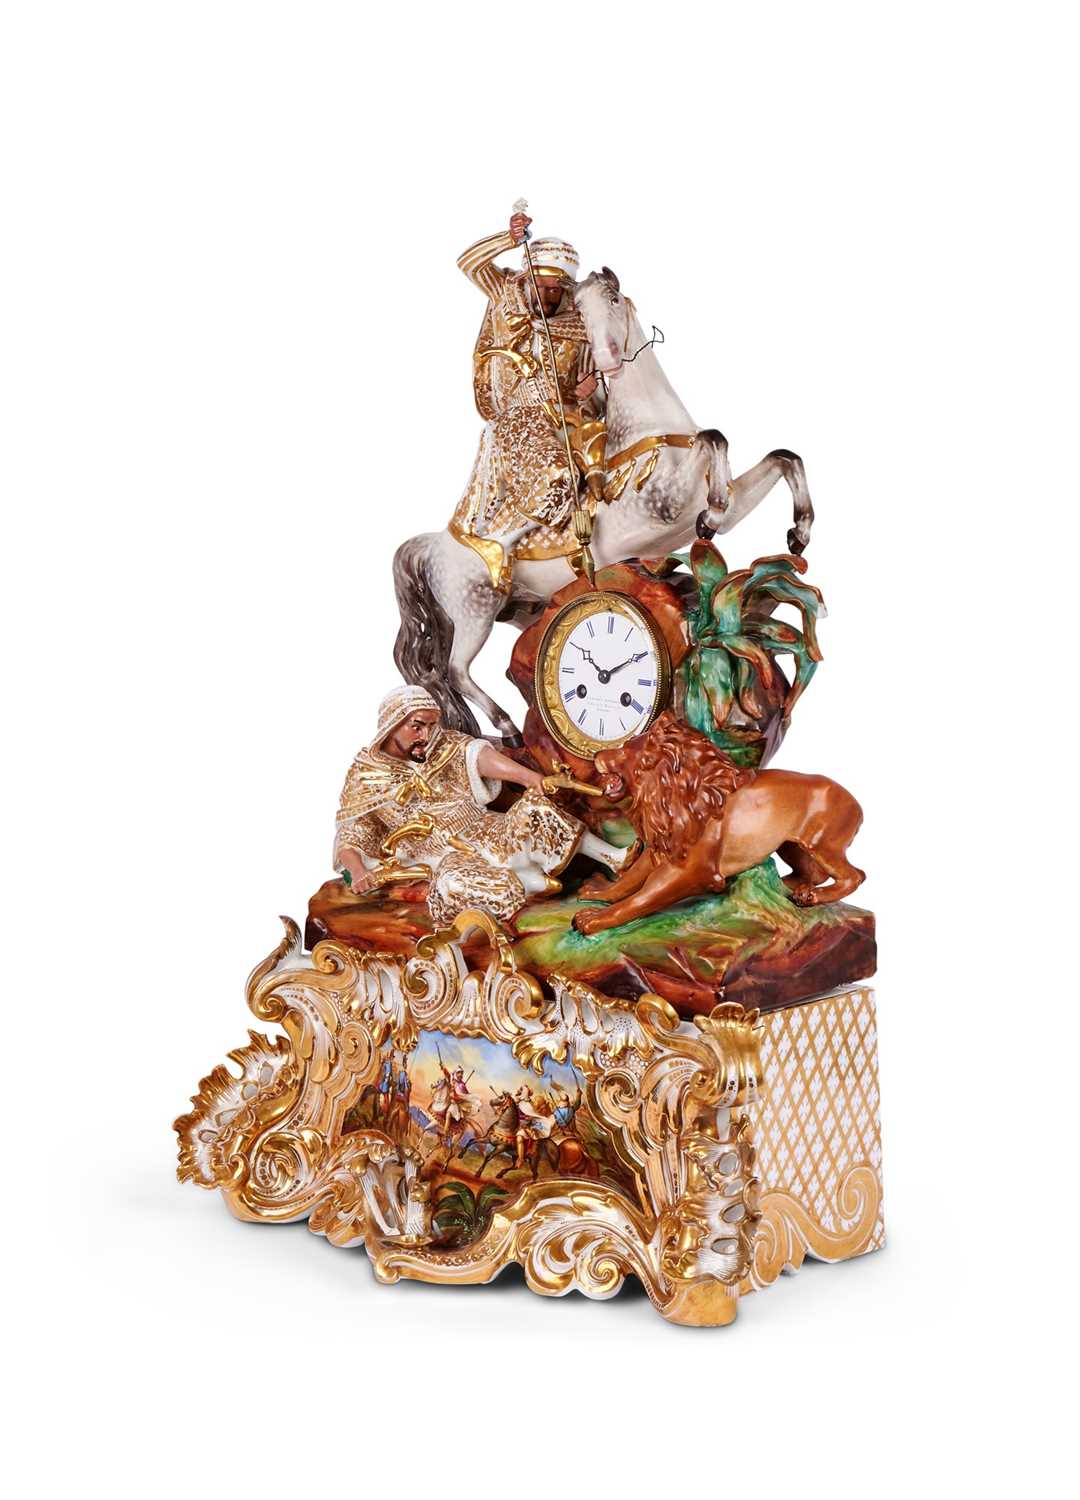 JACOB PETIT: A FINE 1840'S PORCELAIN CLOCK MADE FOR THE OTTOMAN / TURKISH MARKET - Image 2 of 6